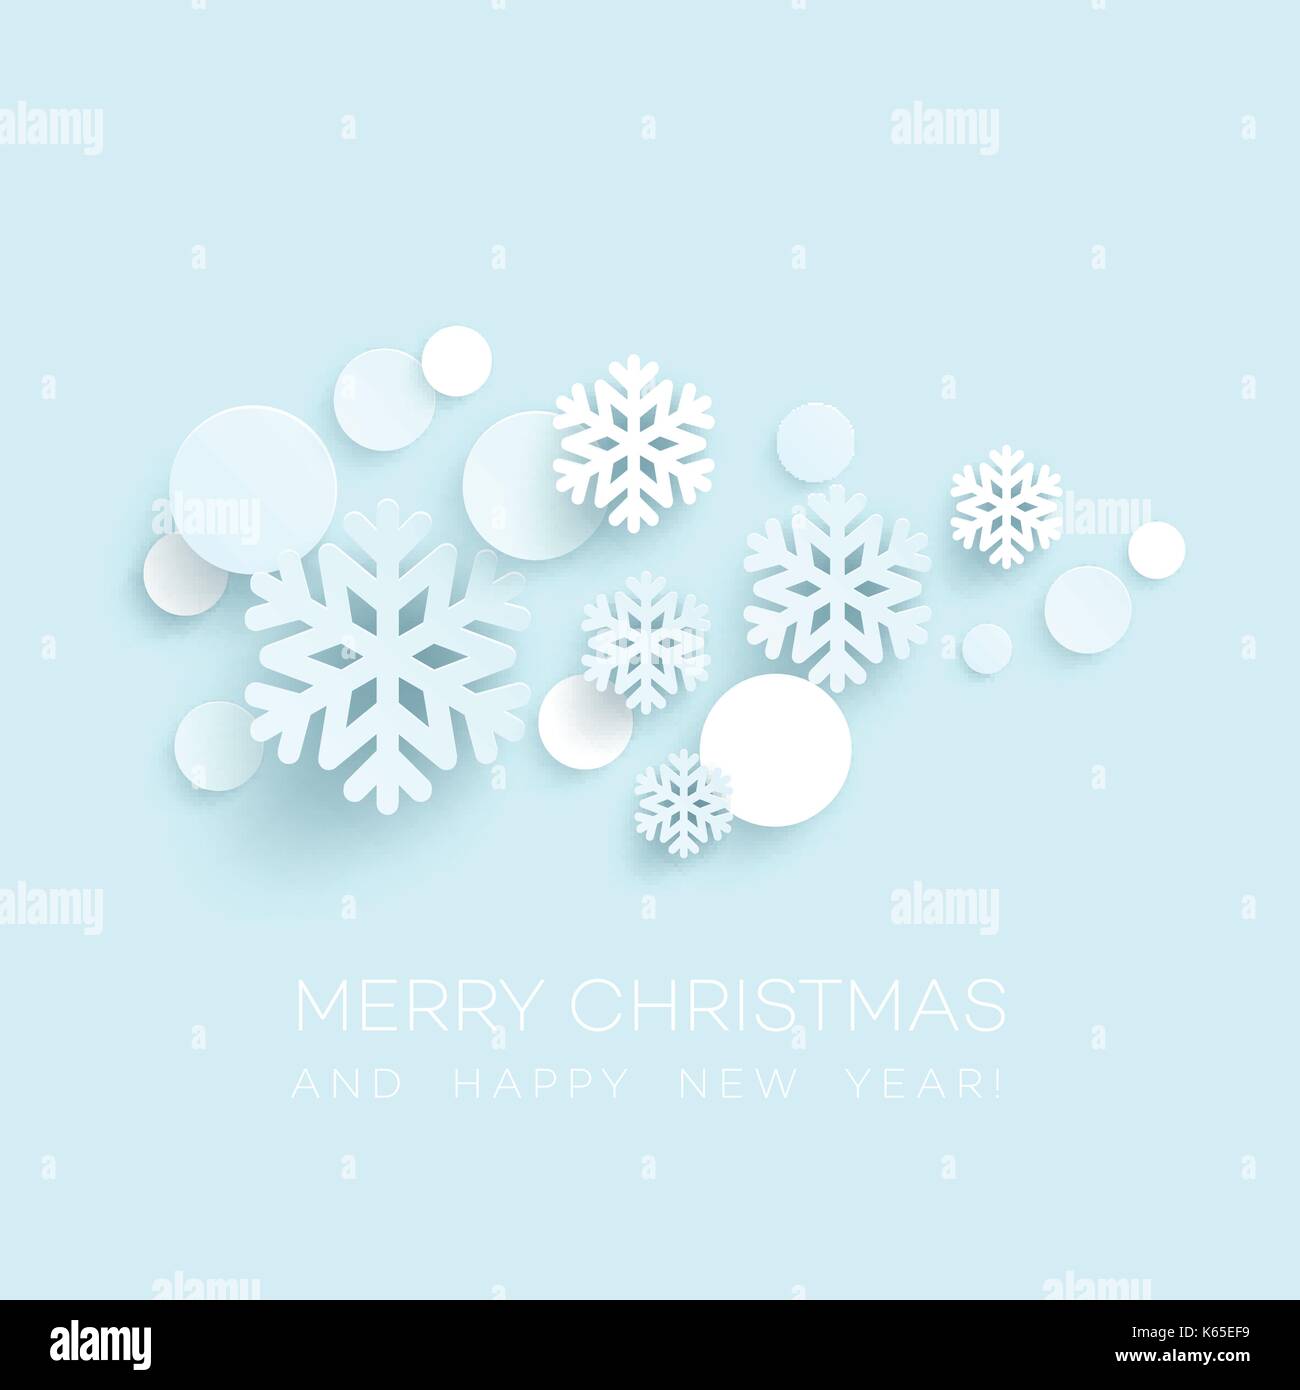 Abstract Papercraft Snowflakes Christmas Background. Vector ...